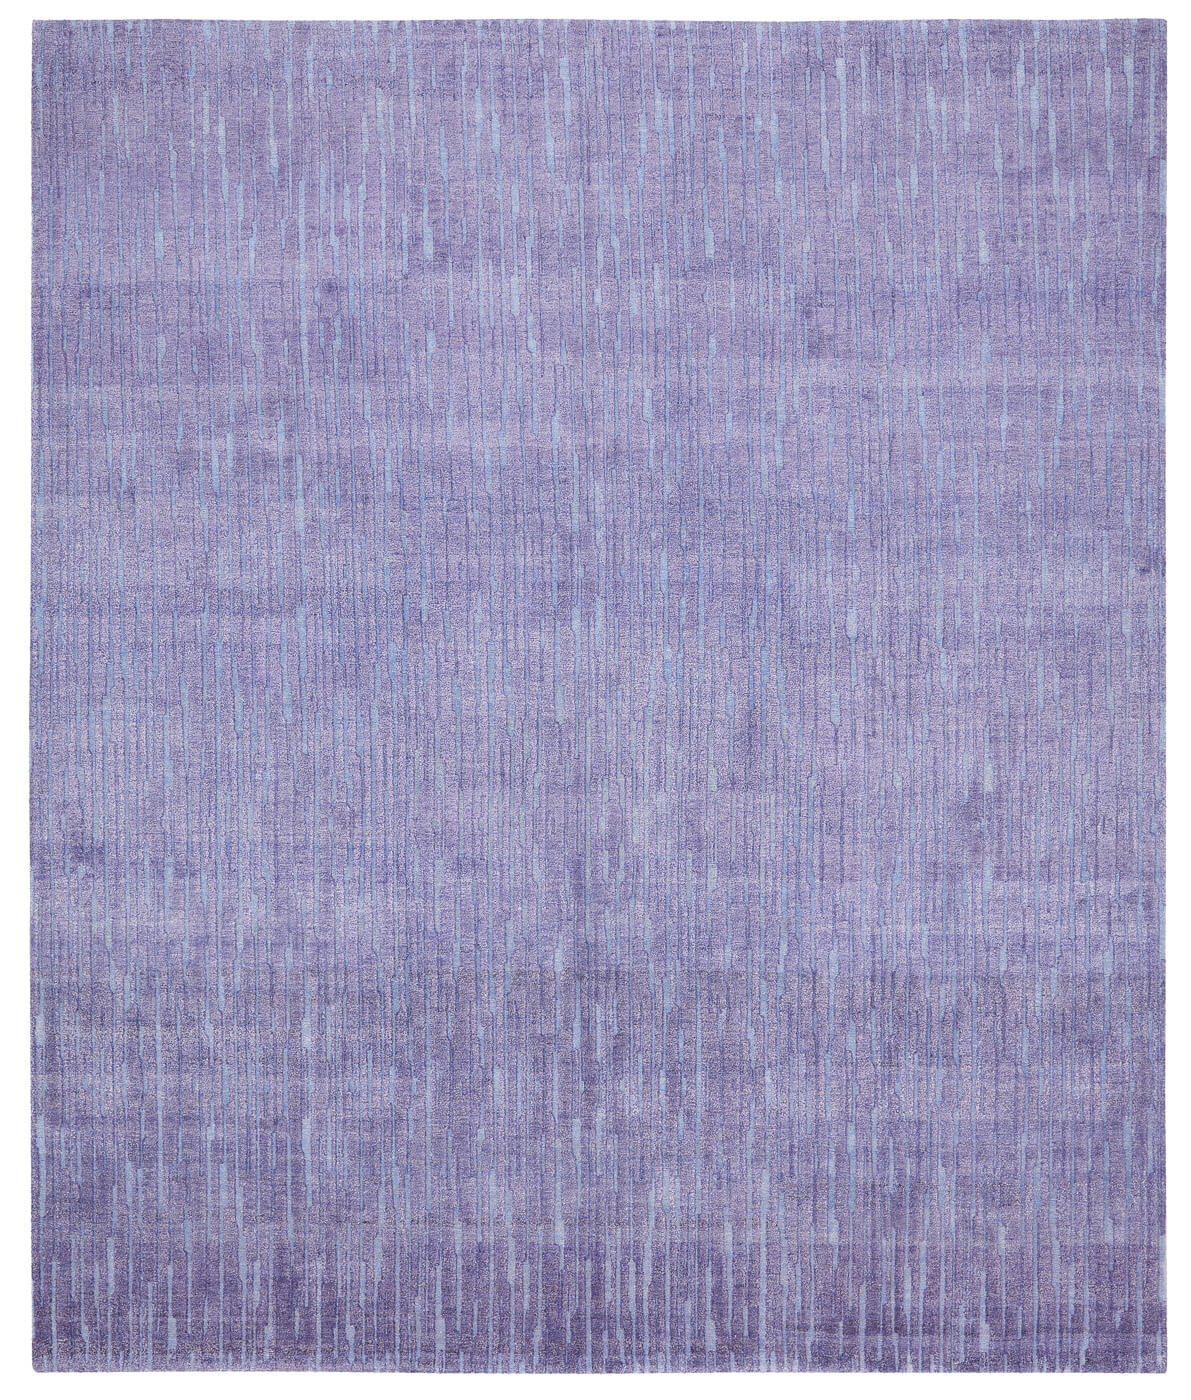 Violet Luxury Hand-woven Rug ☞ Size: 250 x 300 cm